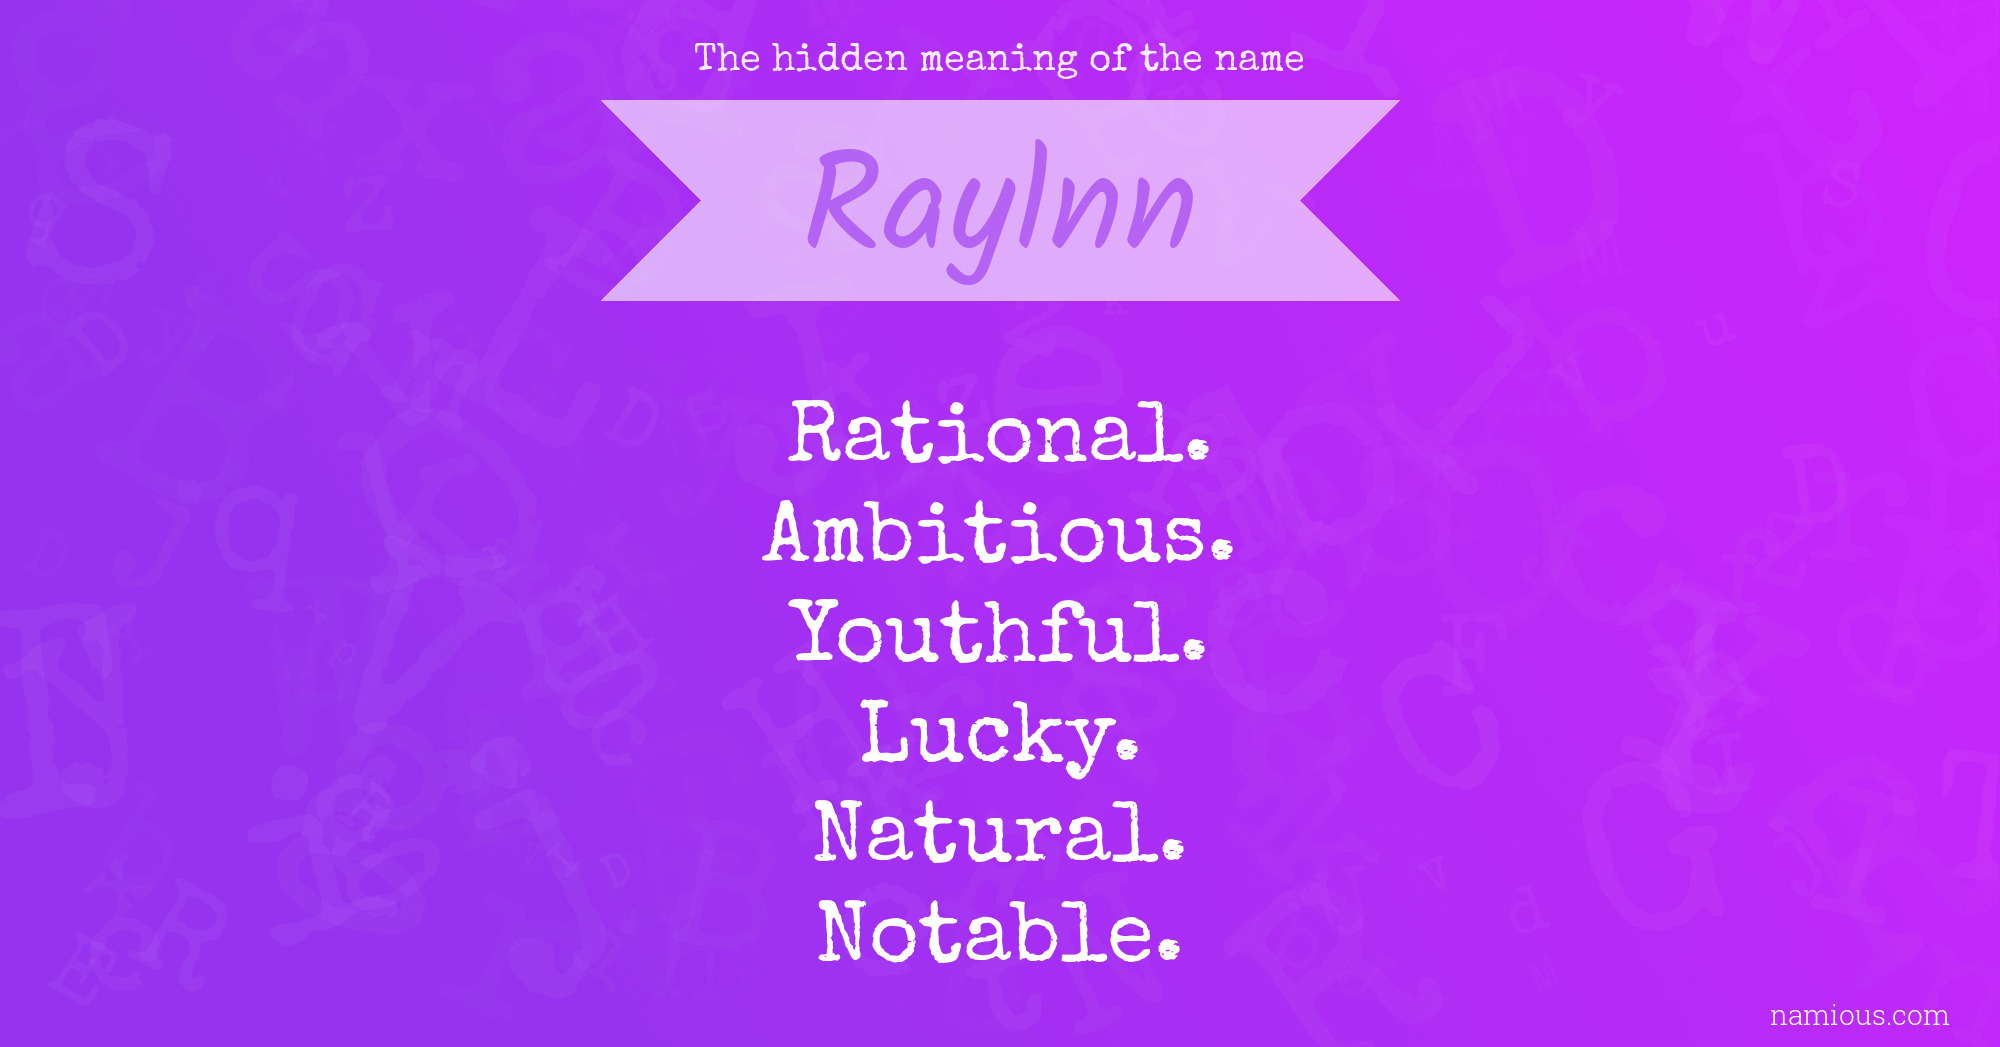 The hidden meaning of the name Raylnn